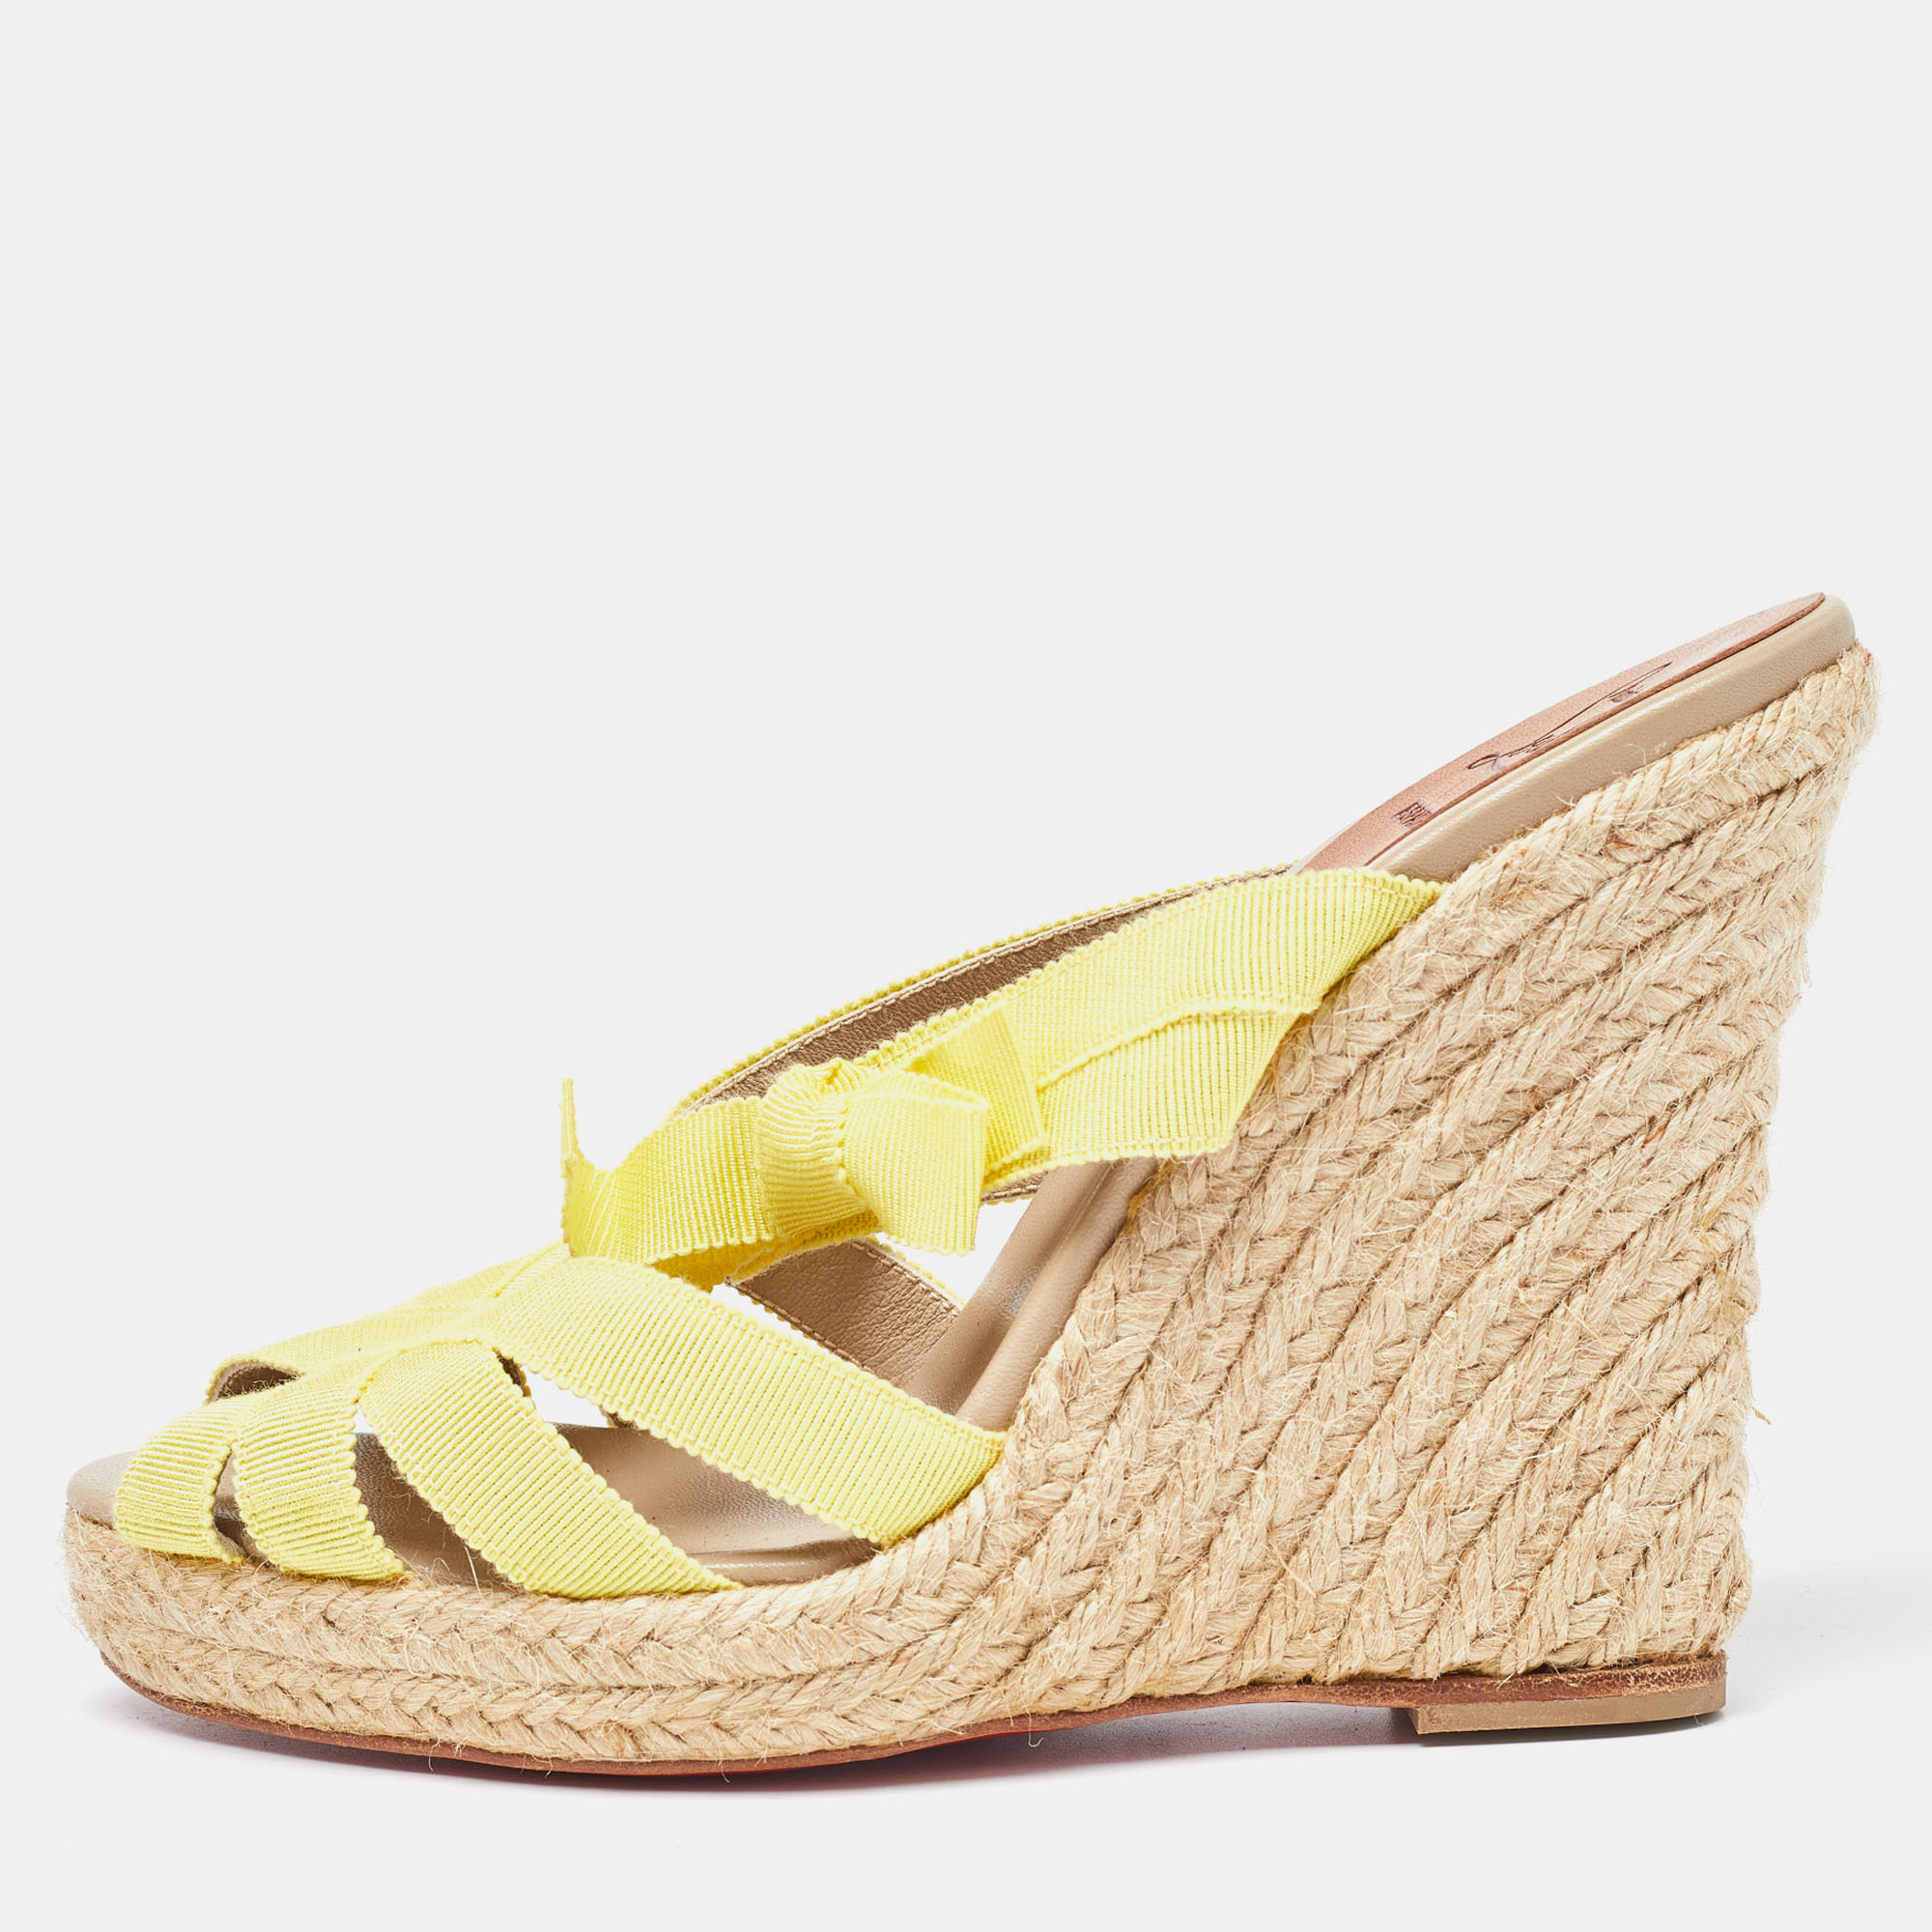 Pre-owned Christian Louboutin Yellow Fabric Delfin Espadrille Wedge Sandals Size 37